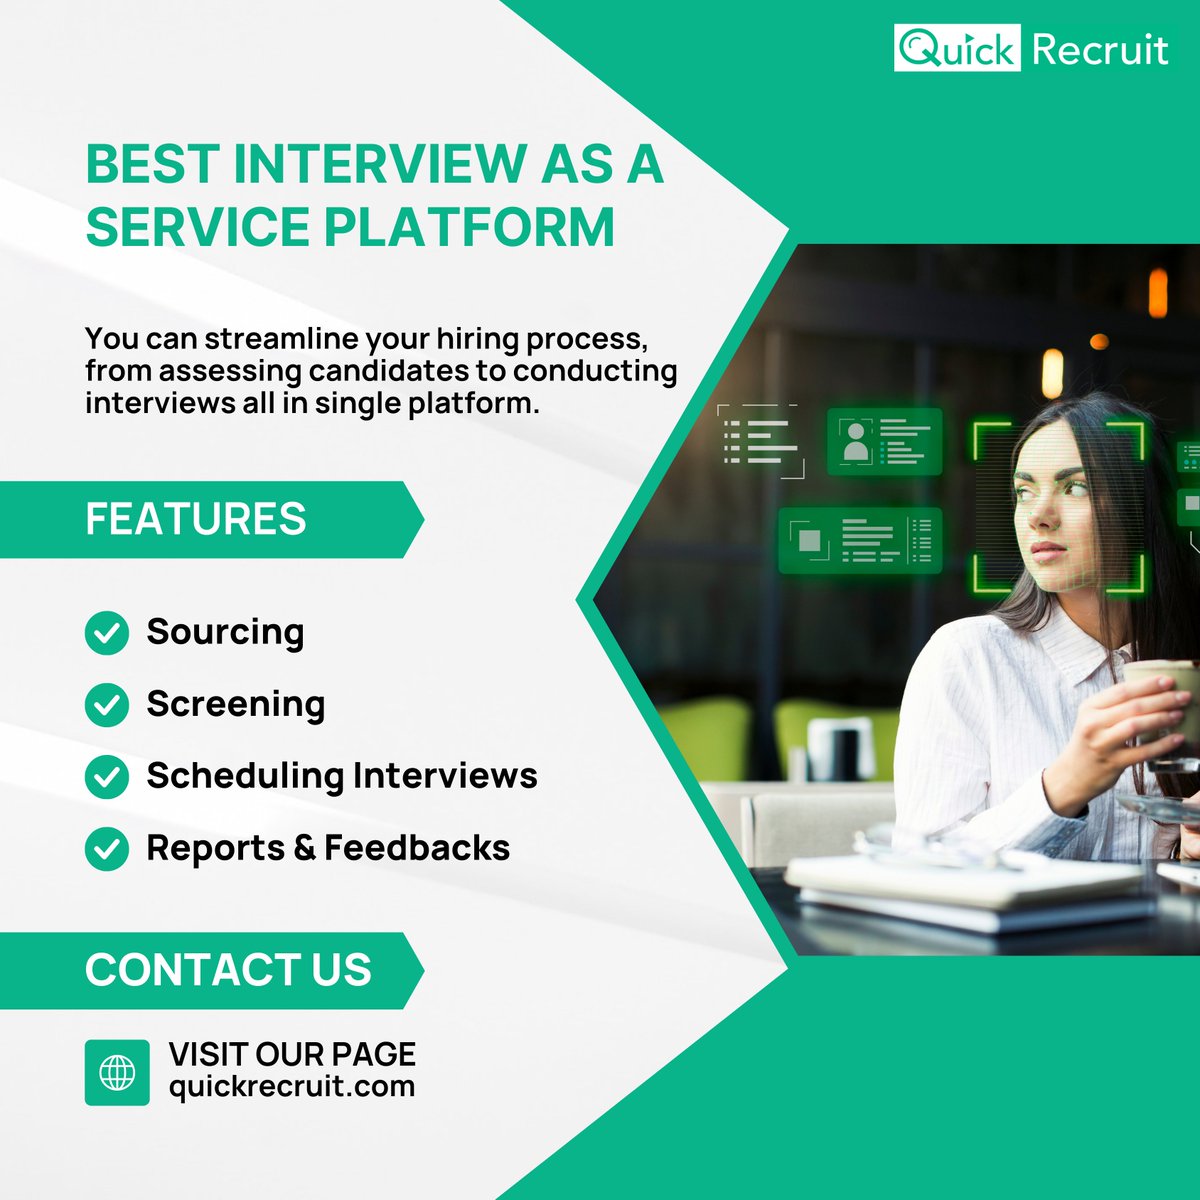 Transform the way you interview with our Interview as a Service platform!

Check out our platform: quickrecruit.com

#streamlinedhiring #recruitmenttech #hiringsolutions #recruitmentgoals #quickrecruit #interviewasaservice #virtualinterviews